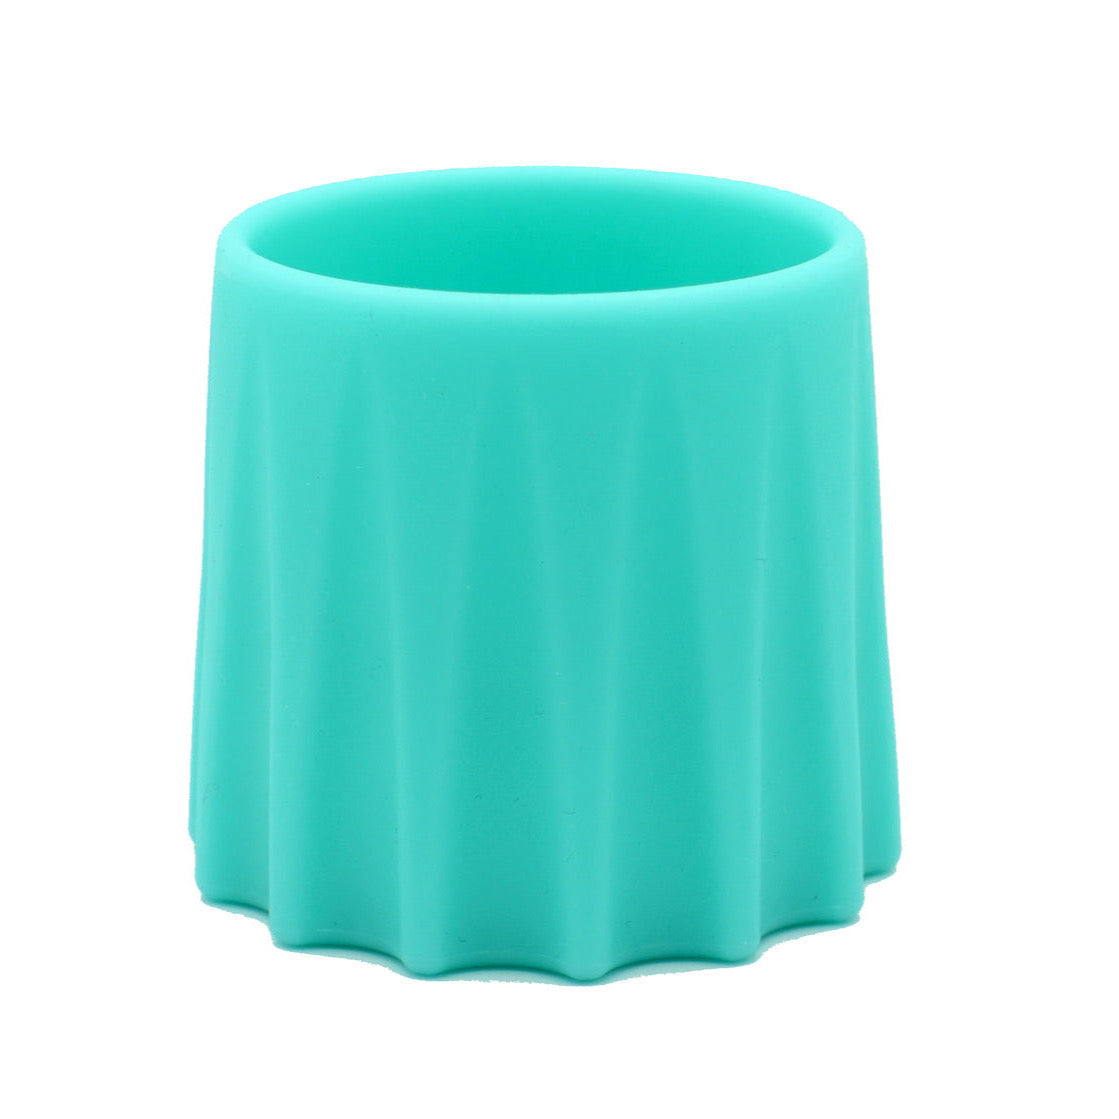 3 oz Flexible Silicone Baby and Toddler Cup Teal Eztotz Side View